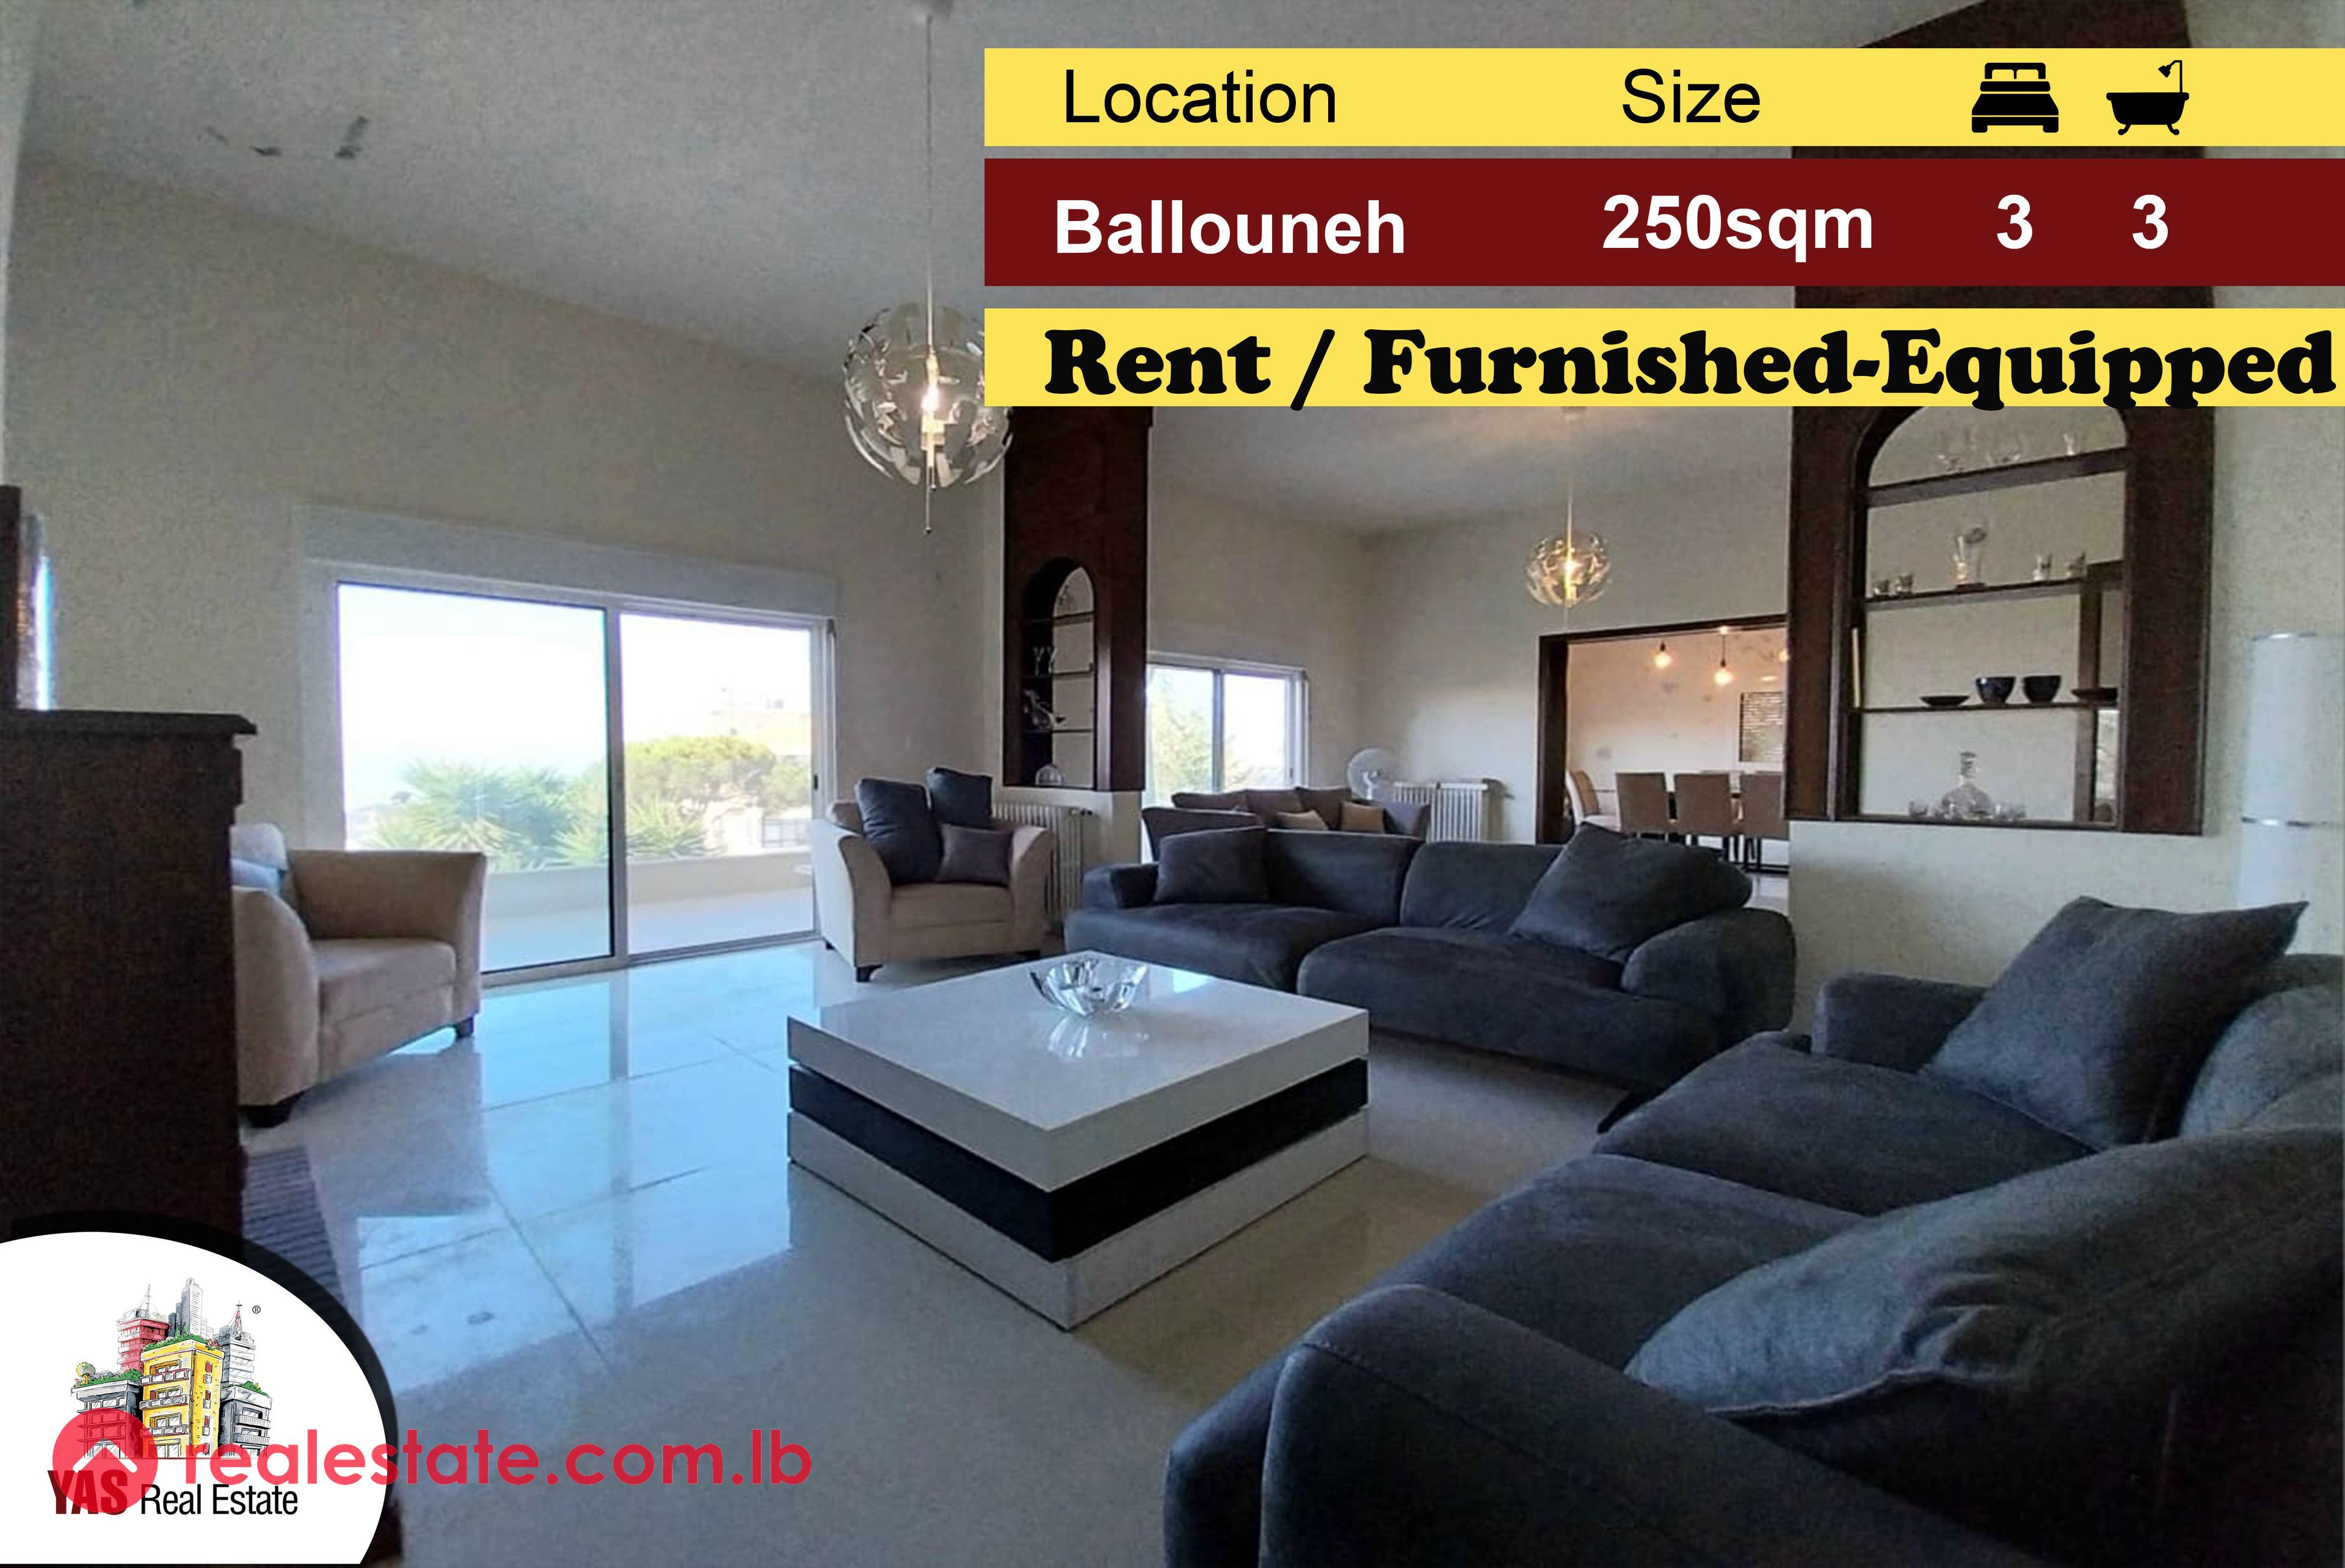 Ballouneh 250m2 | Rent | Luxury | Furnished/Equipped | Renovated |